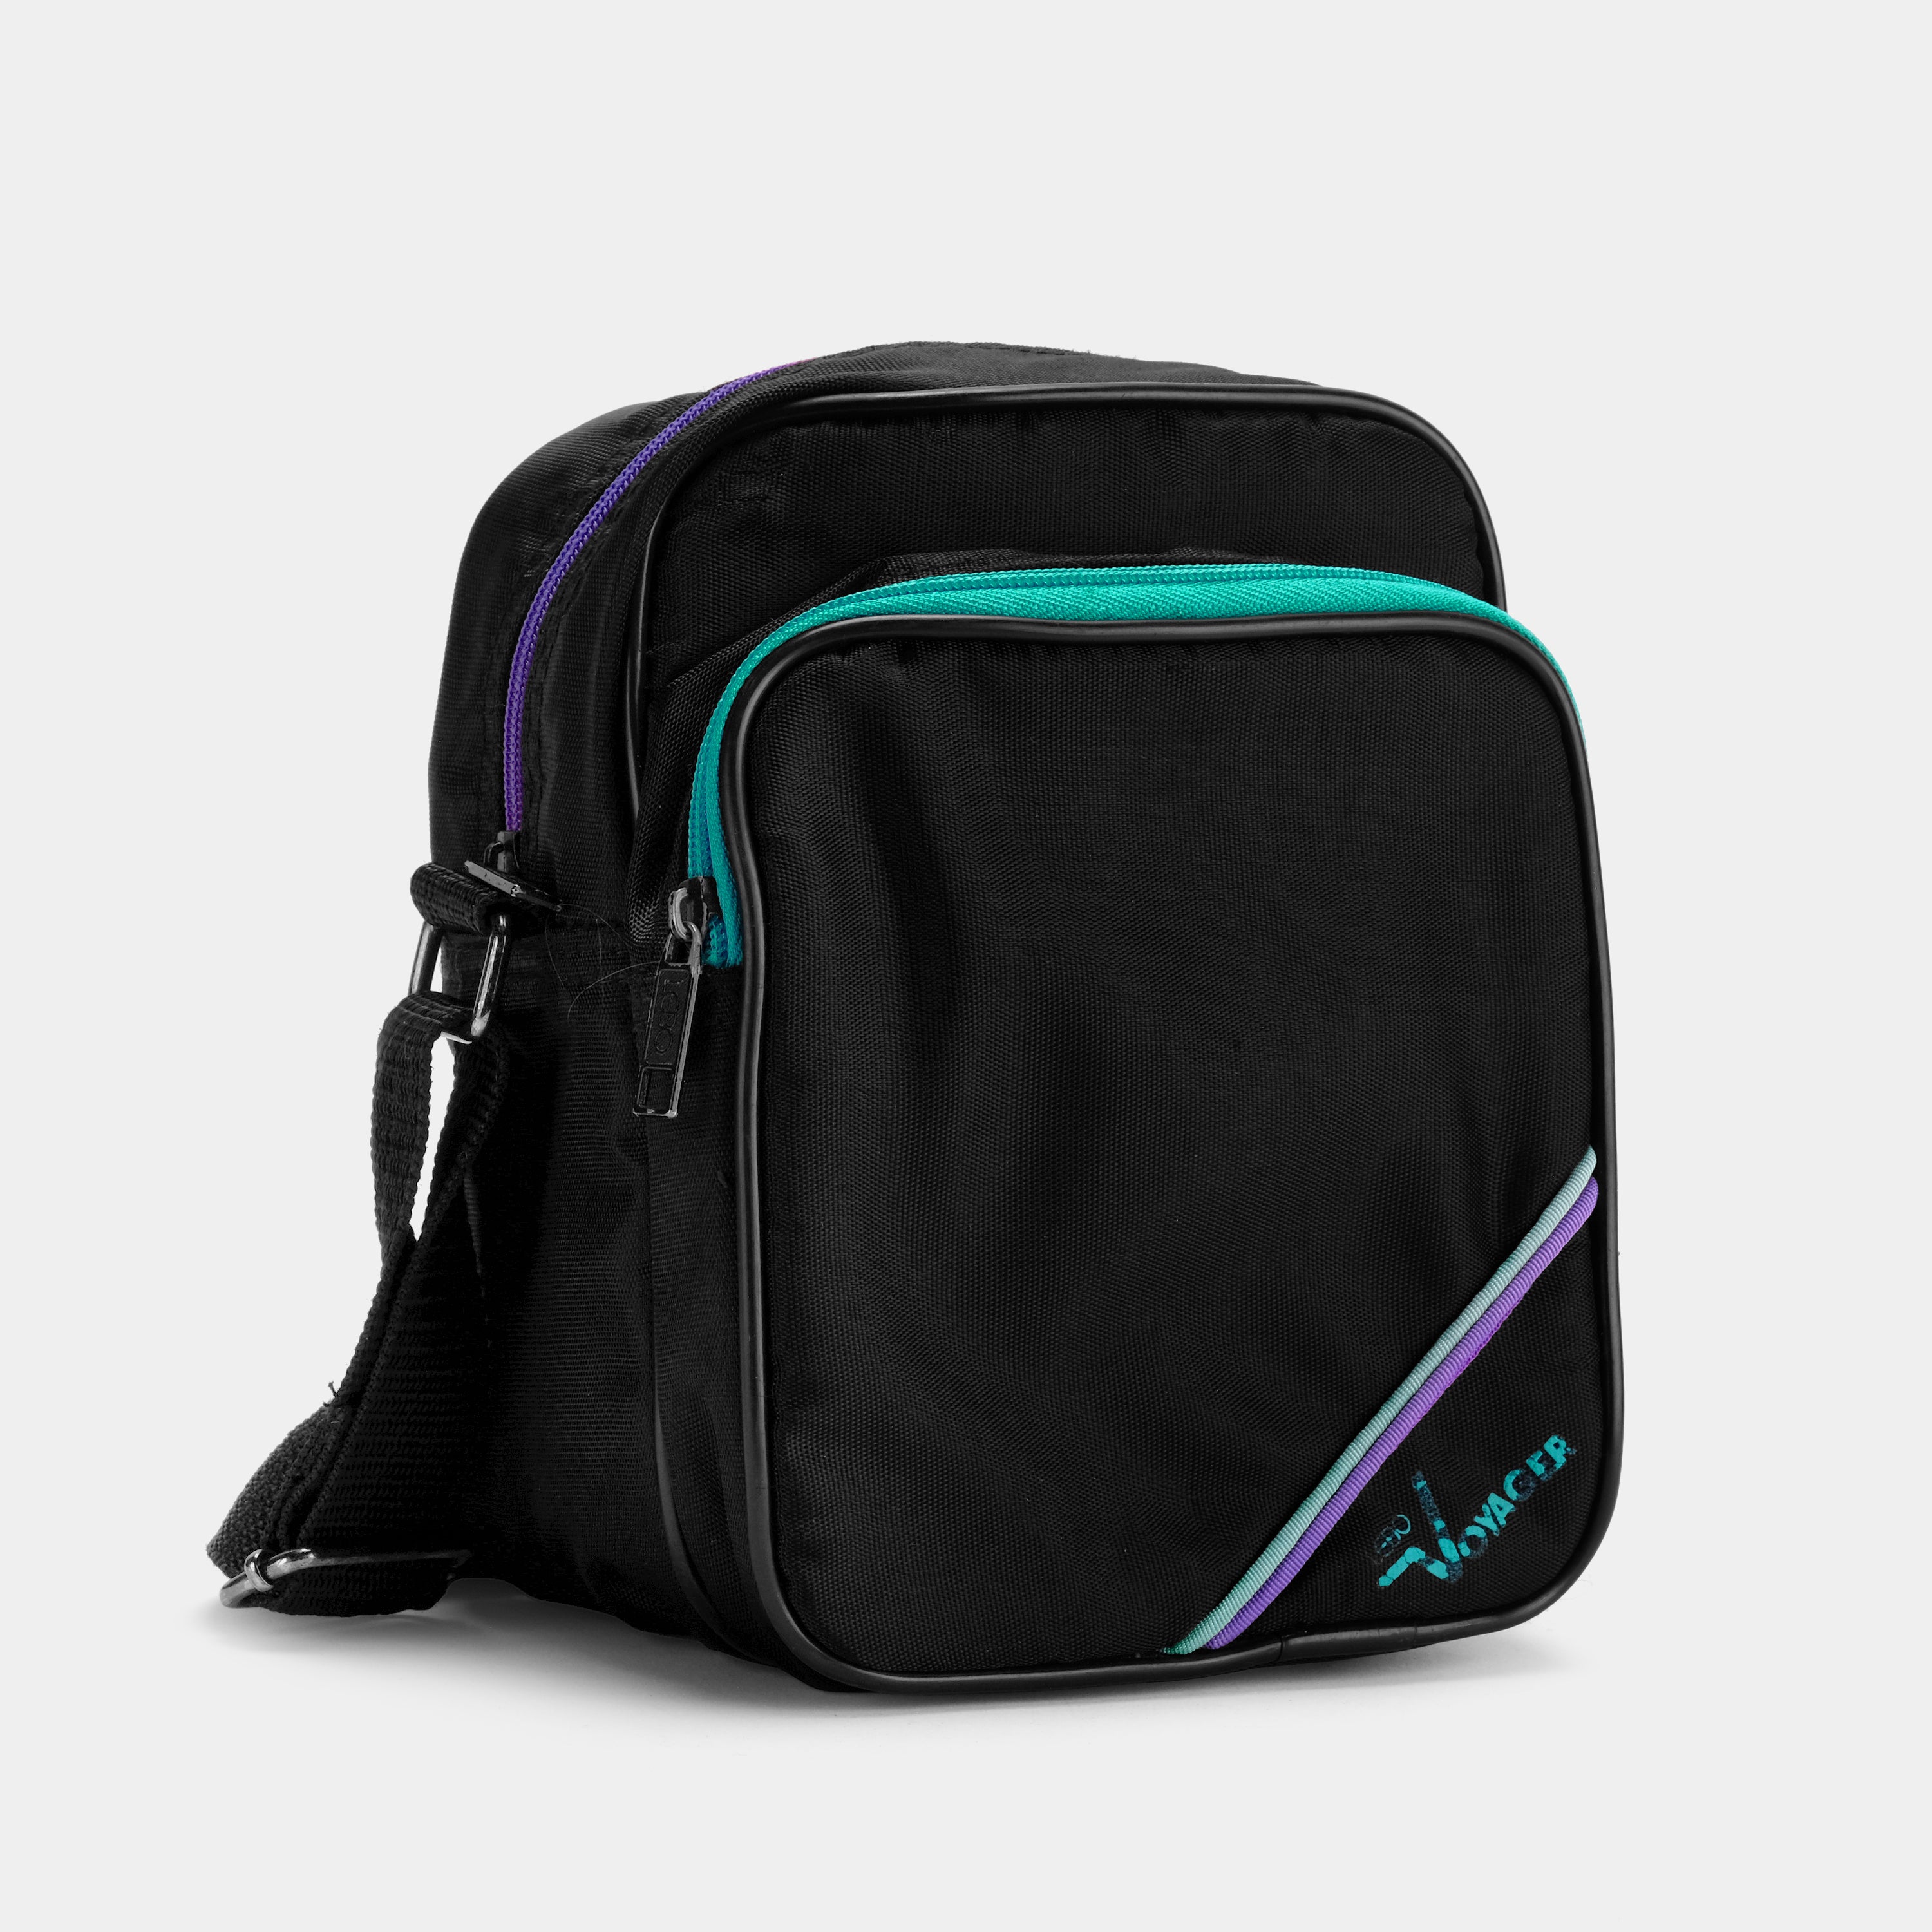 Lebo Voyager Black with Turquoise and Purple Stripes Camera Bag